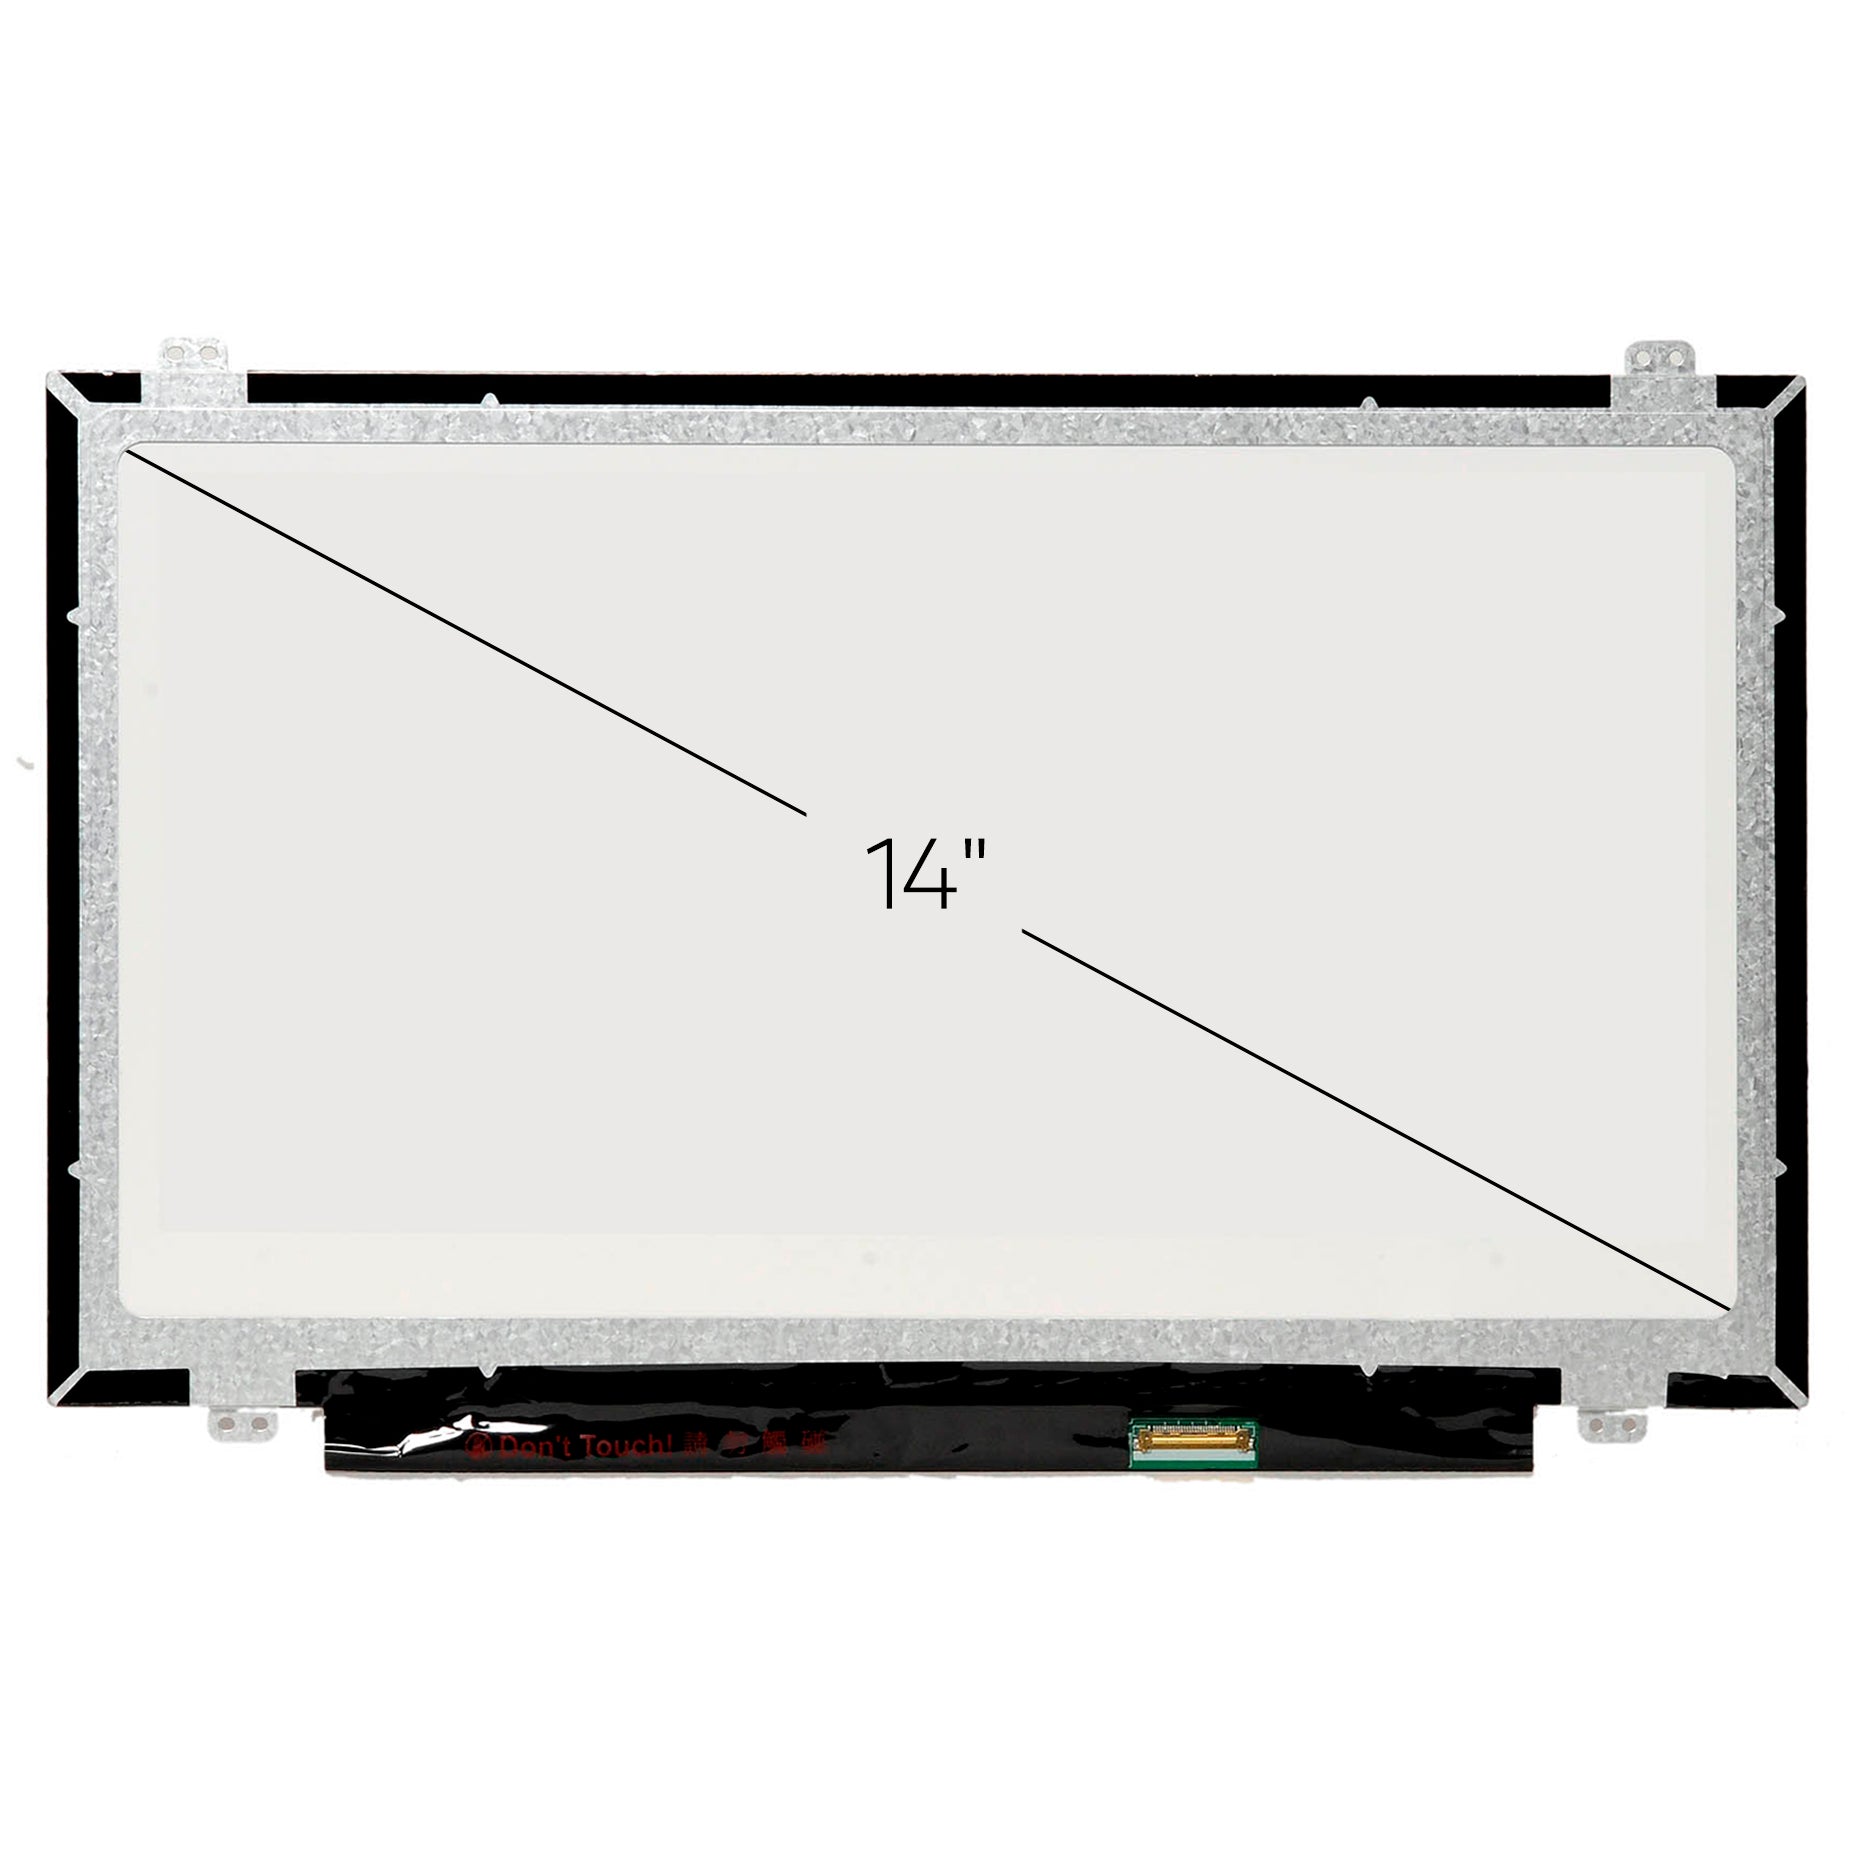 Screen Replacement for NT140WHM-N42 HD 1366x768 Glossy LCD LED Display